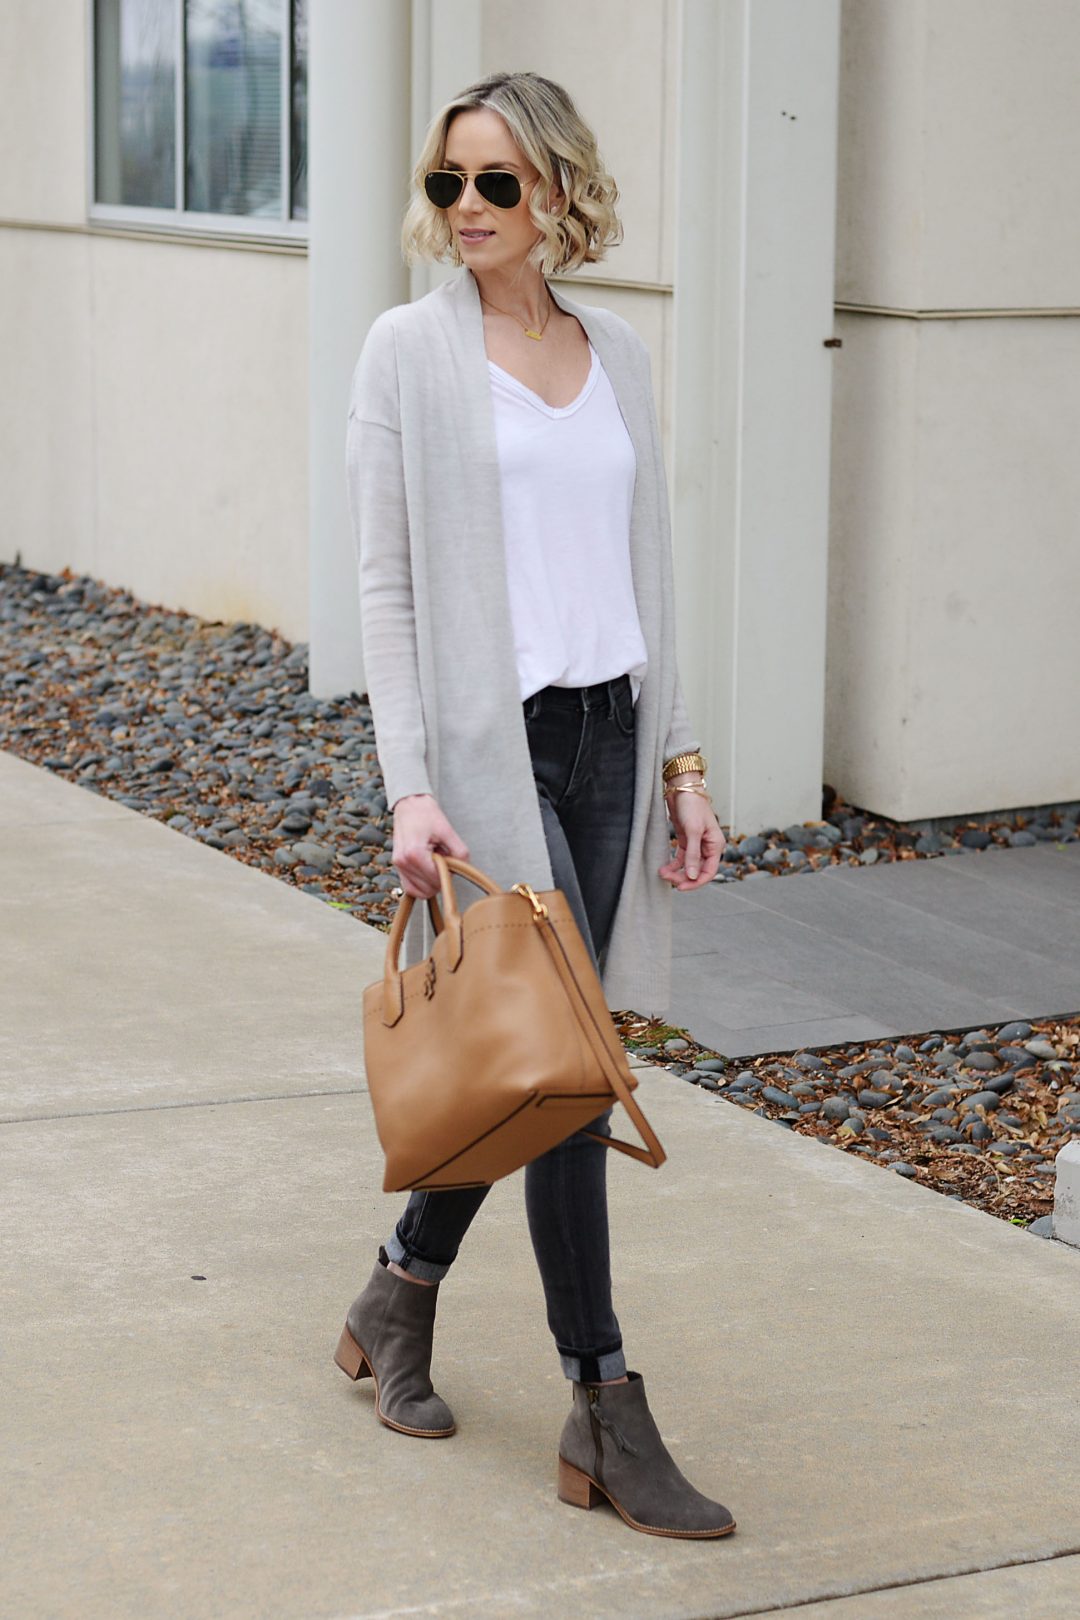 Cardigan and Jeans - Straight A Style